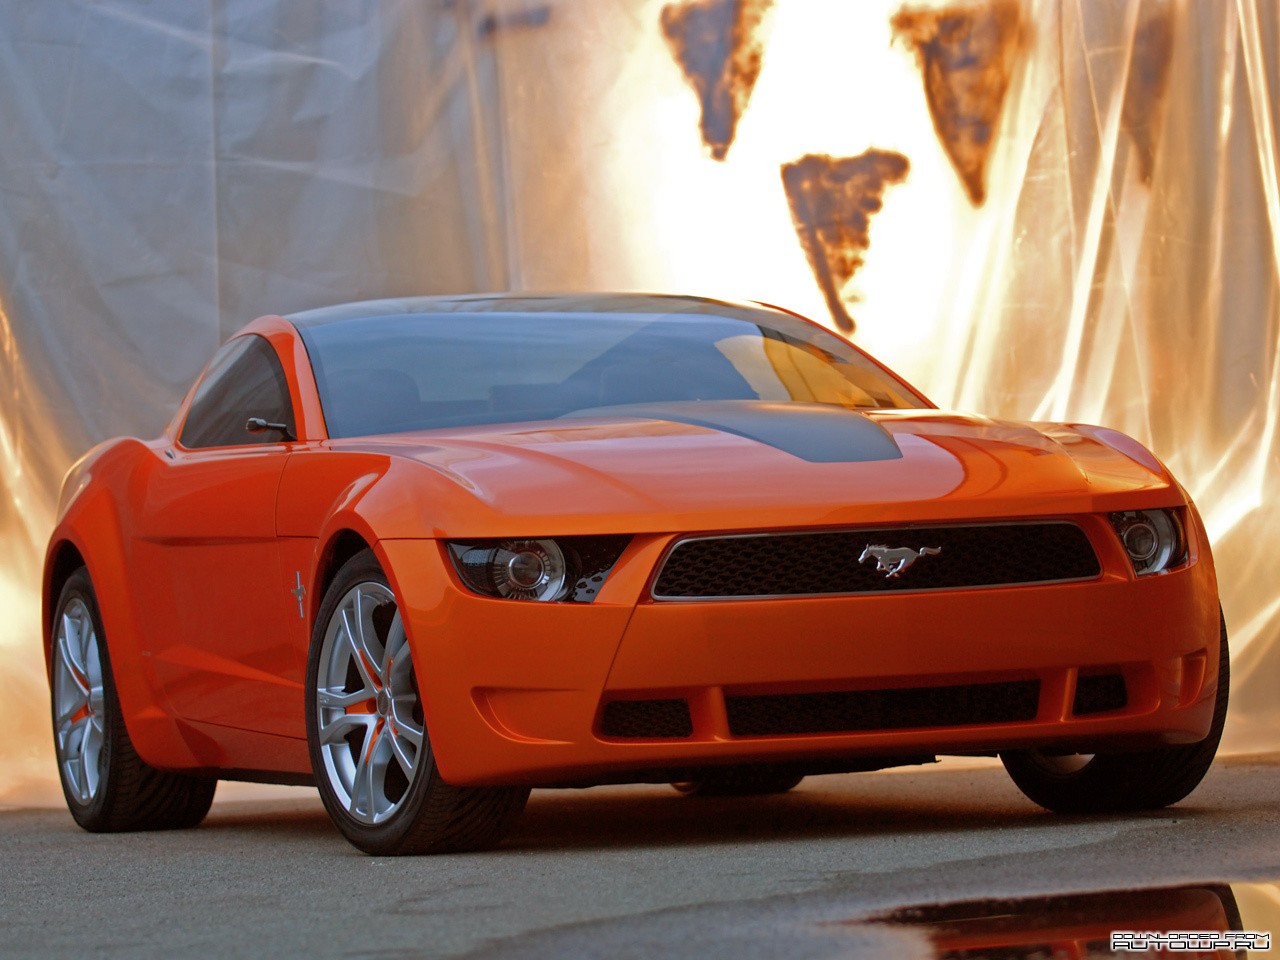 General 1280x960 car Ford Mustang orange cars Ford vehicle Mustang by Giugiaro